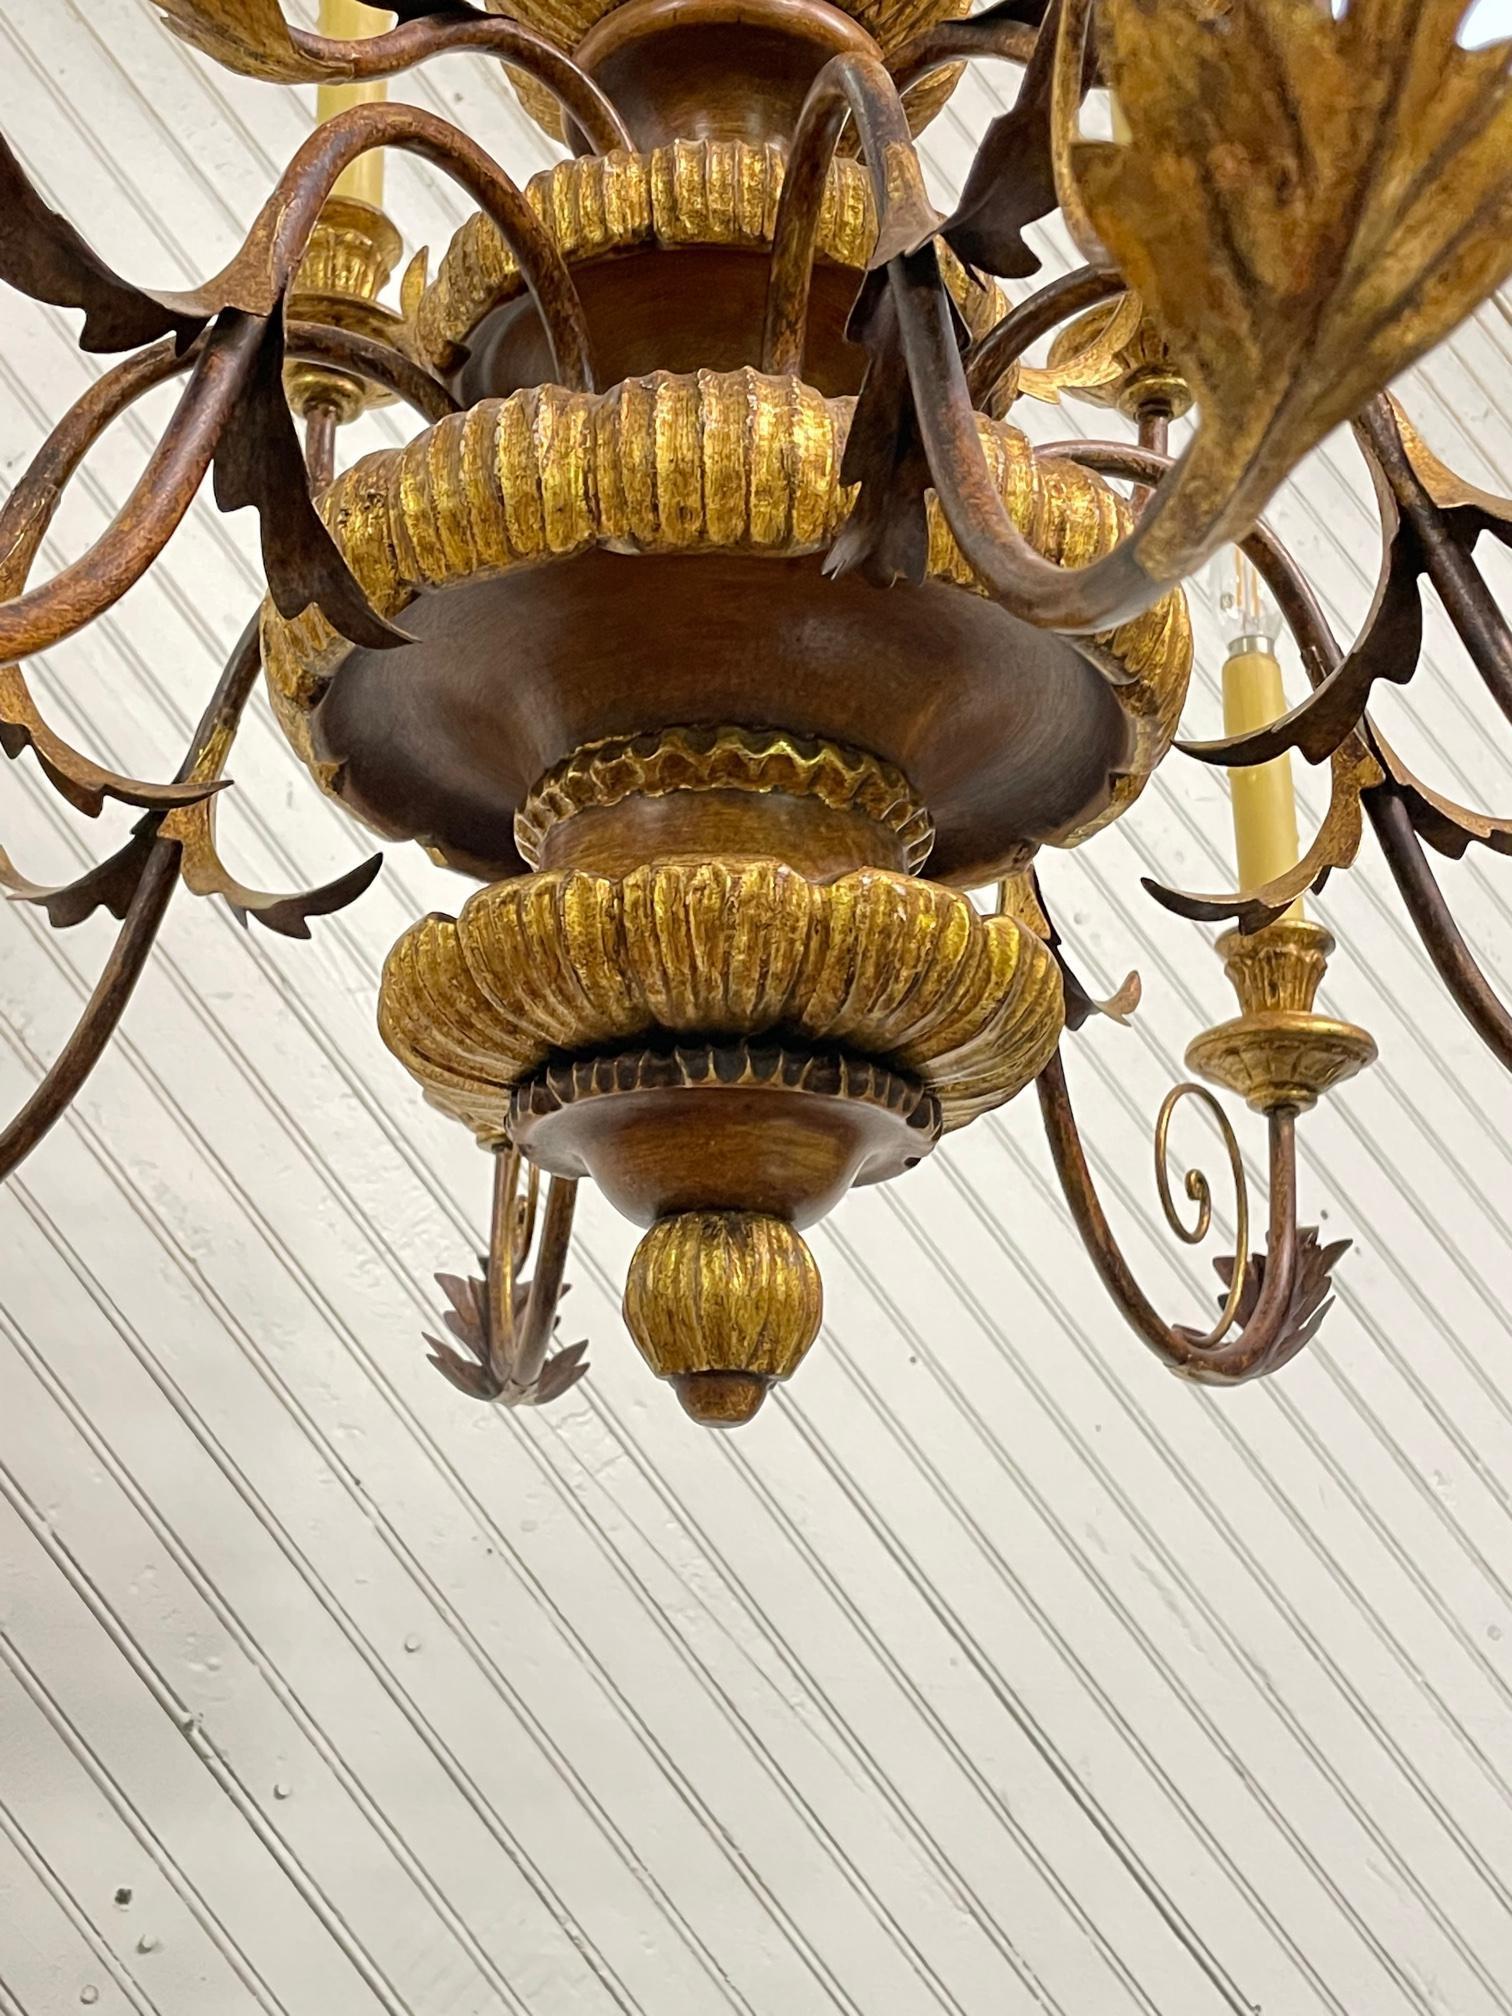 Large 12-arm chandelier features two levels, gold leaf detailing, and tole metal acanthus leaf accents. Good condition with imperfections consistent with age. Some candle sleeves show cracks along top edge. May exhibit scuffs, marks, or wear, see